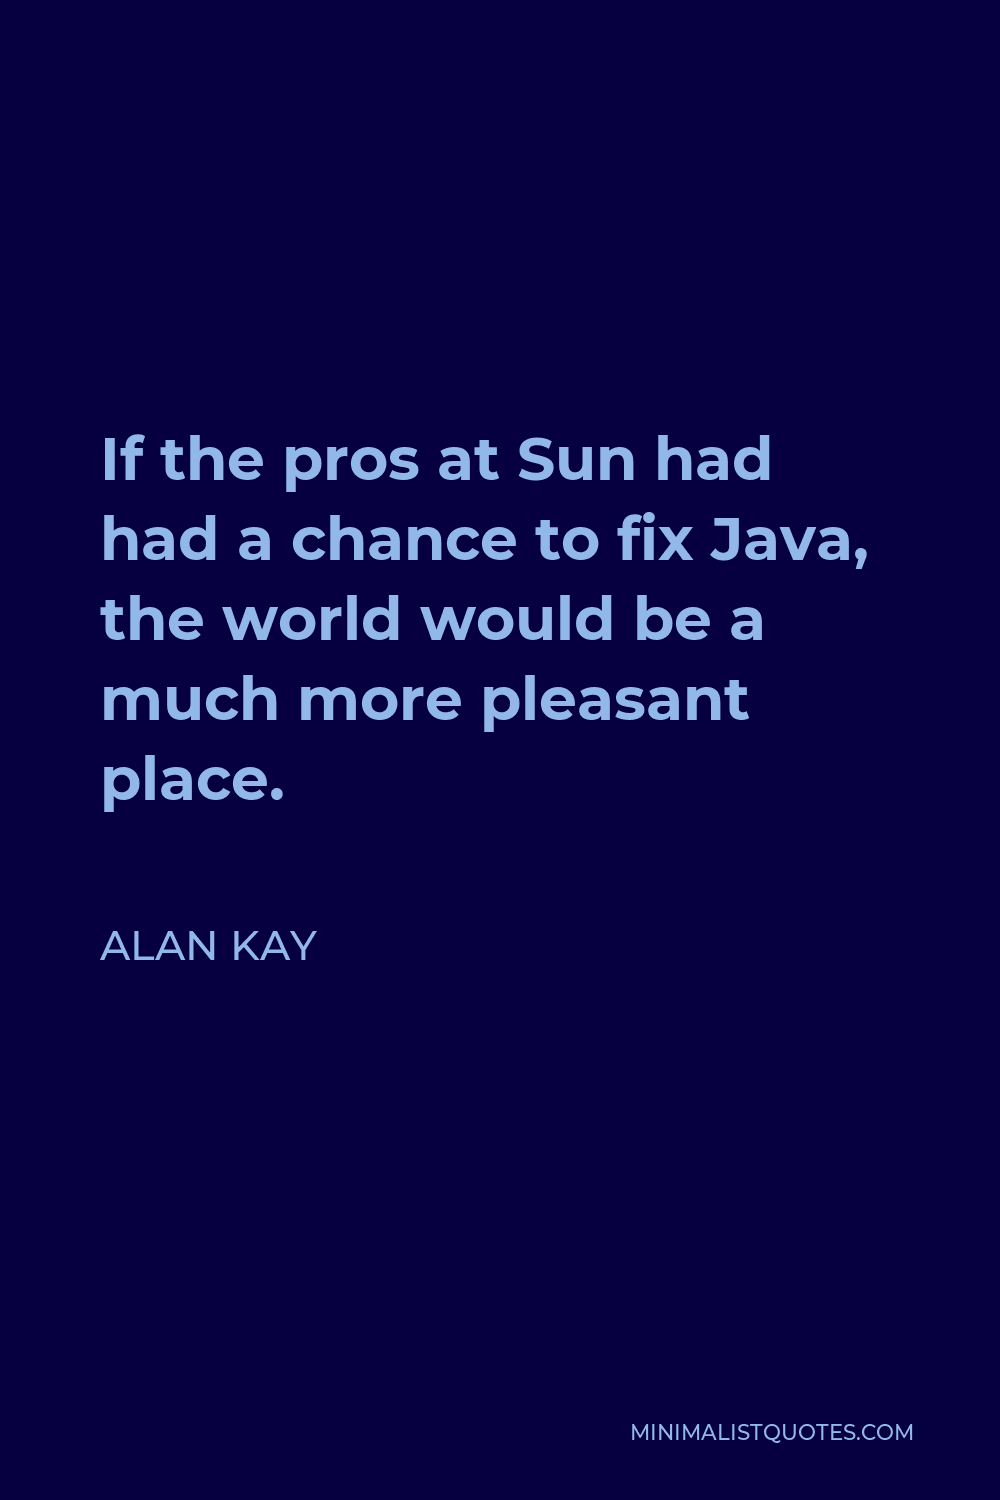 Alan Kay Quote - If the pros at Sun had had a chance to fix Java, the world would be a much more pleasant place.